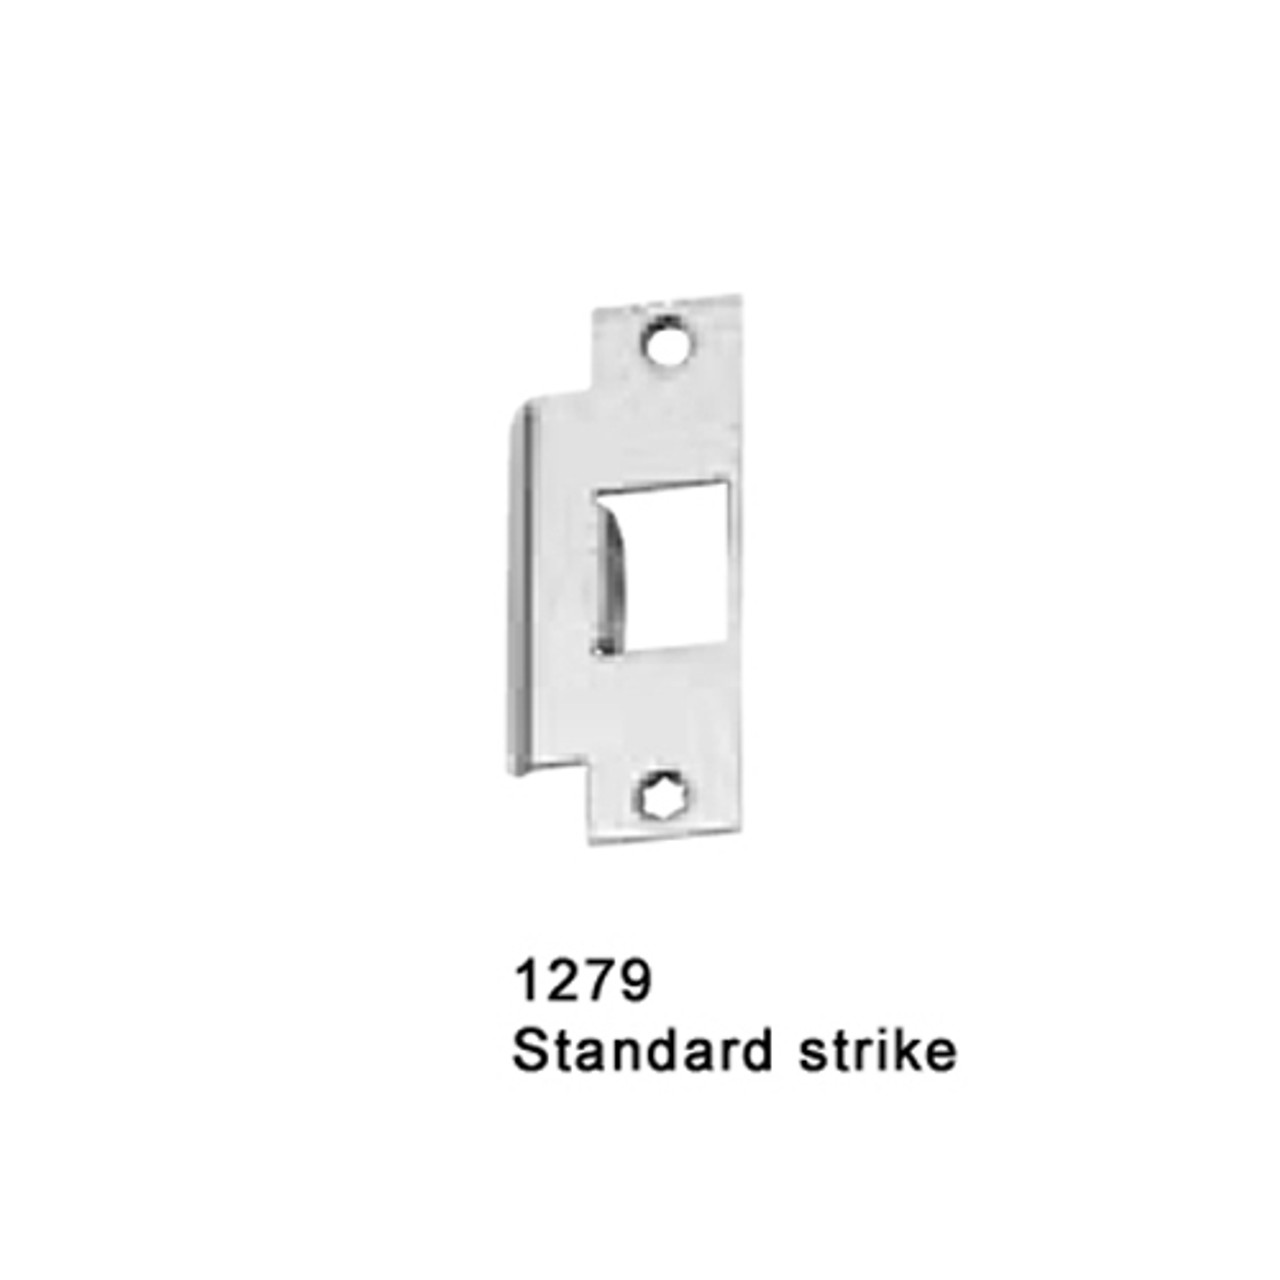 CD25-M-EO-US32-3-LHR Falcon 25 Series Exit Only Mortise Lock Devices in Polished Stainless Steel